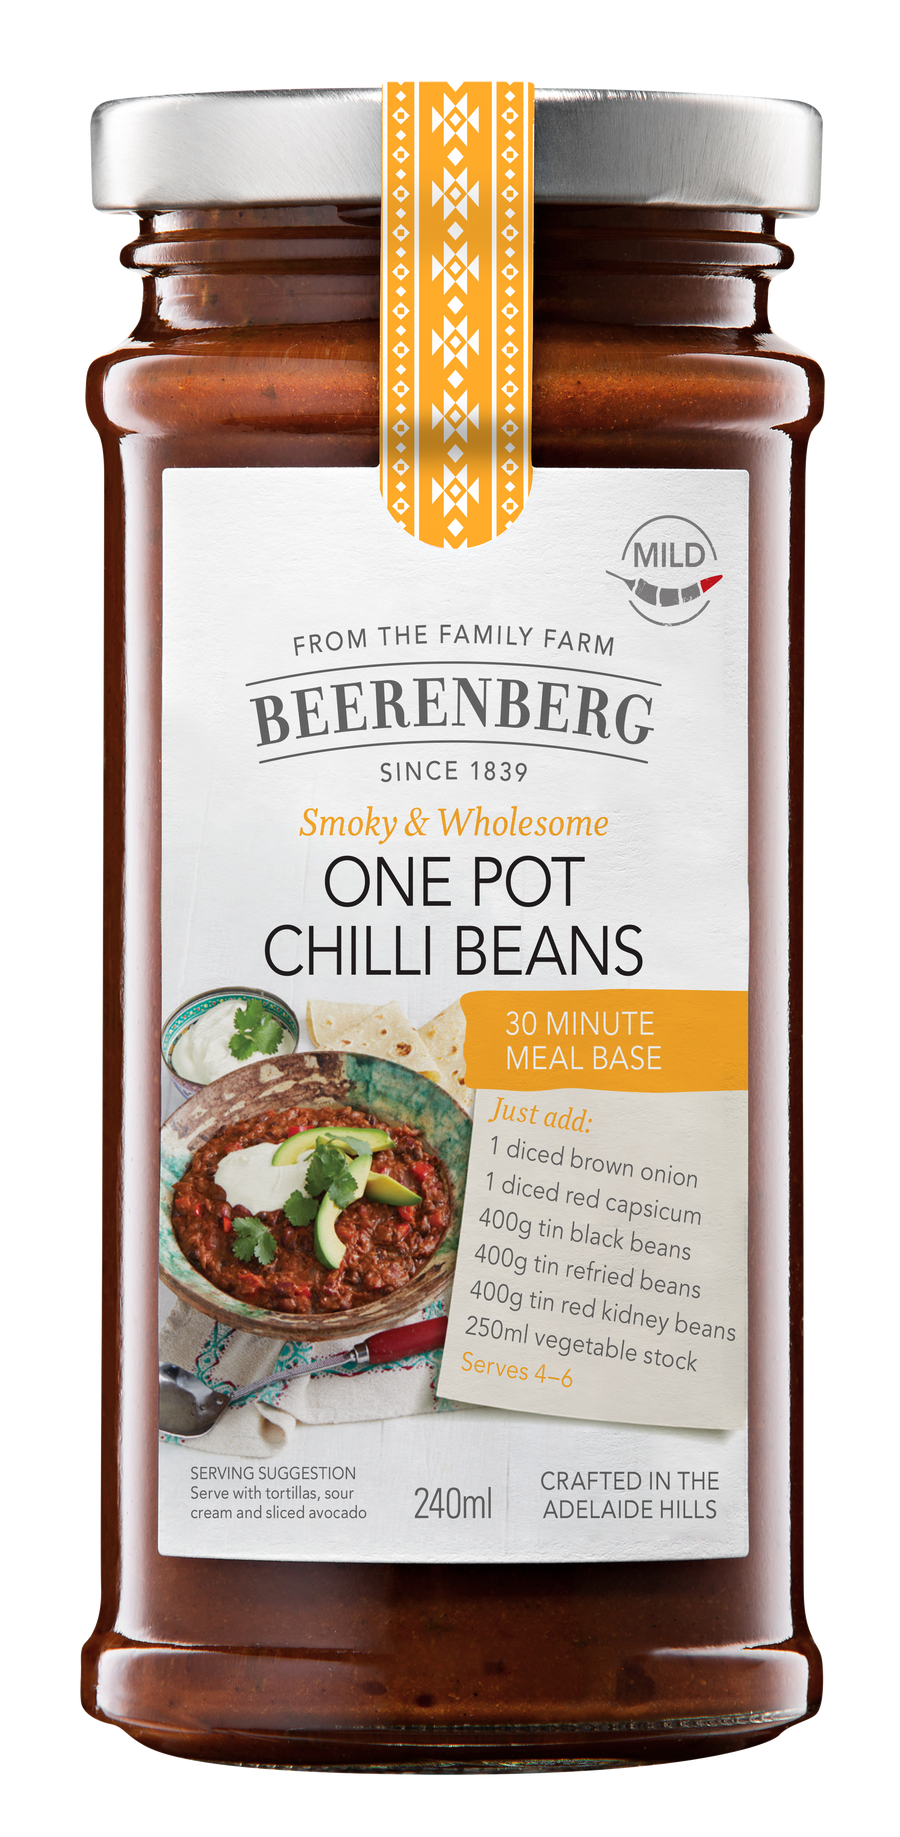 One Pot Chilli Beans 30 Minute Meal Base